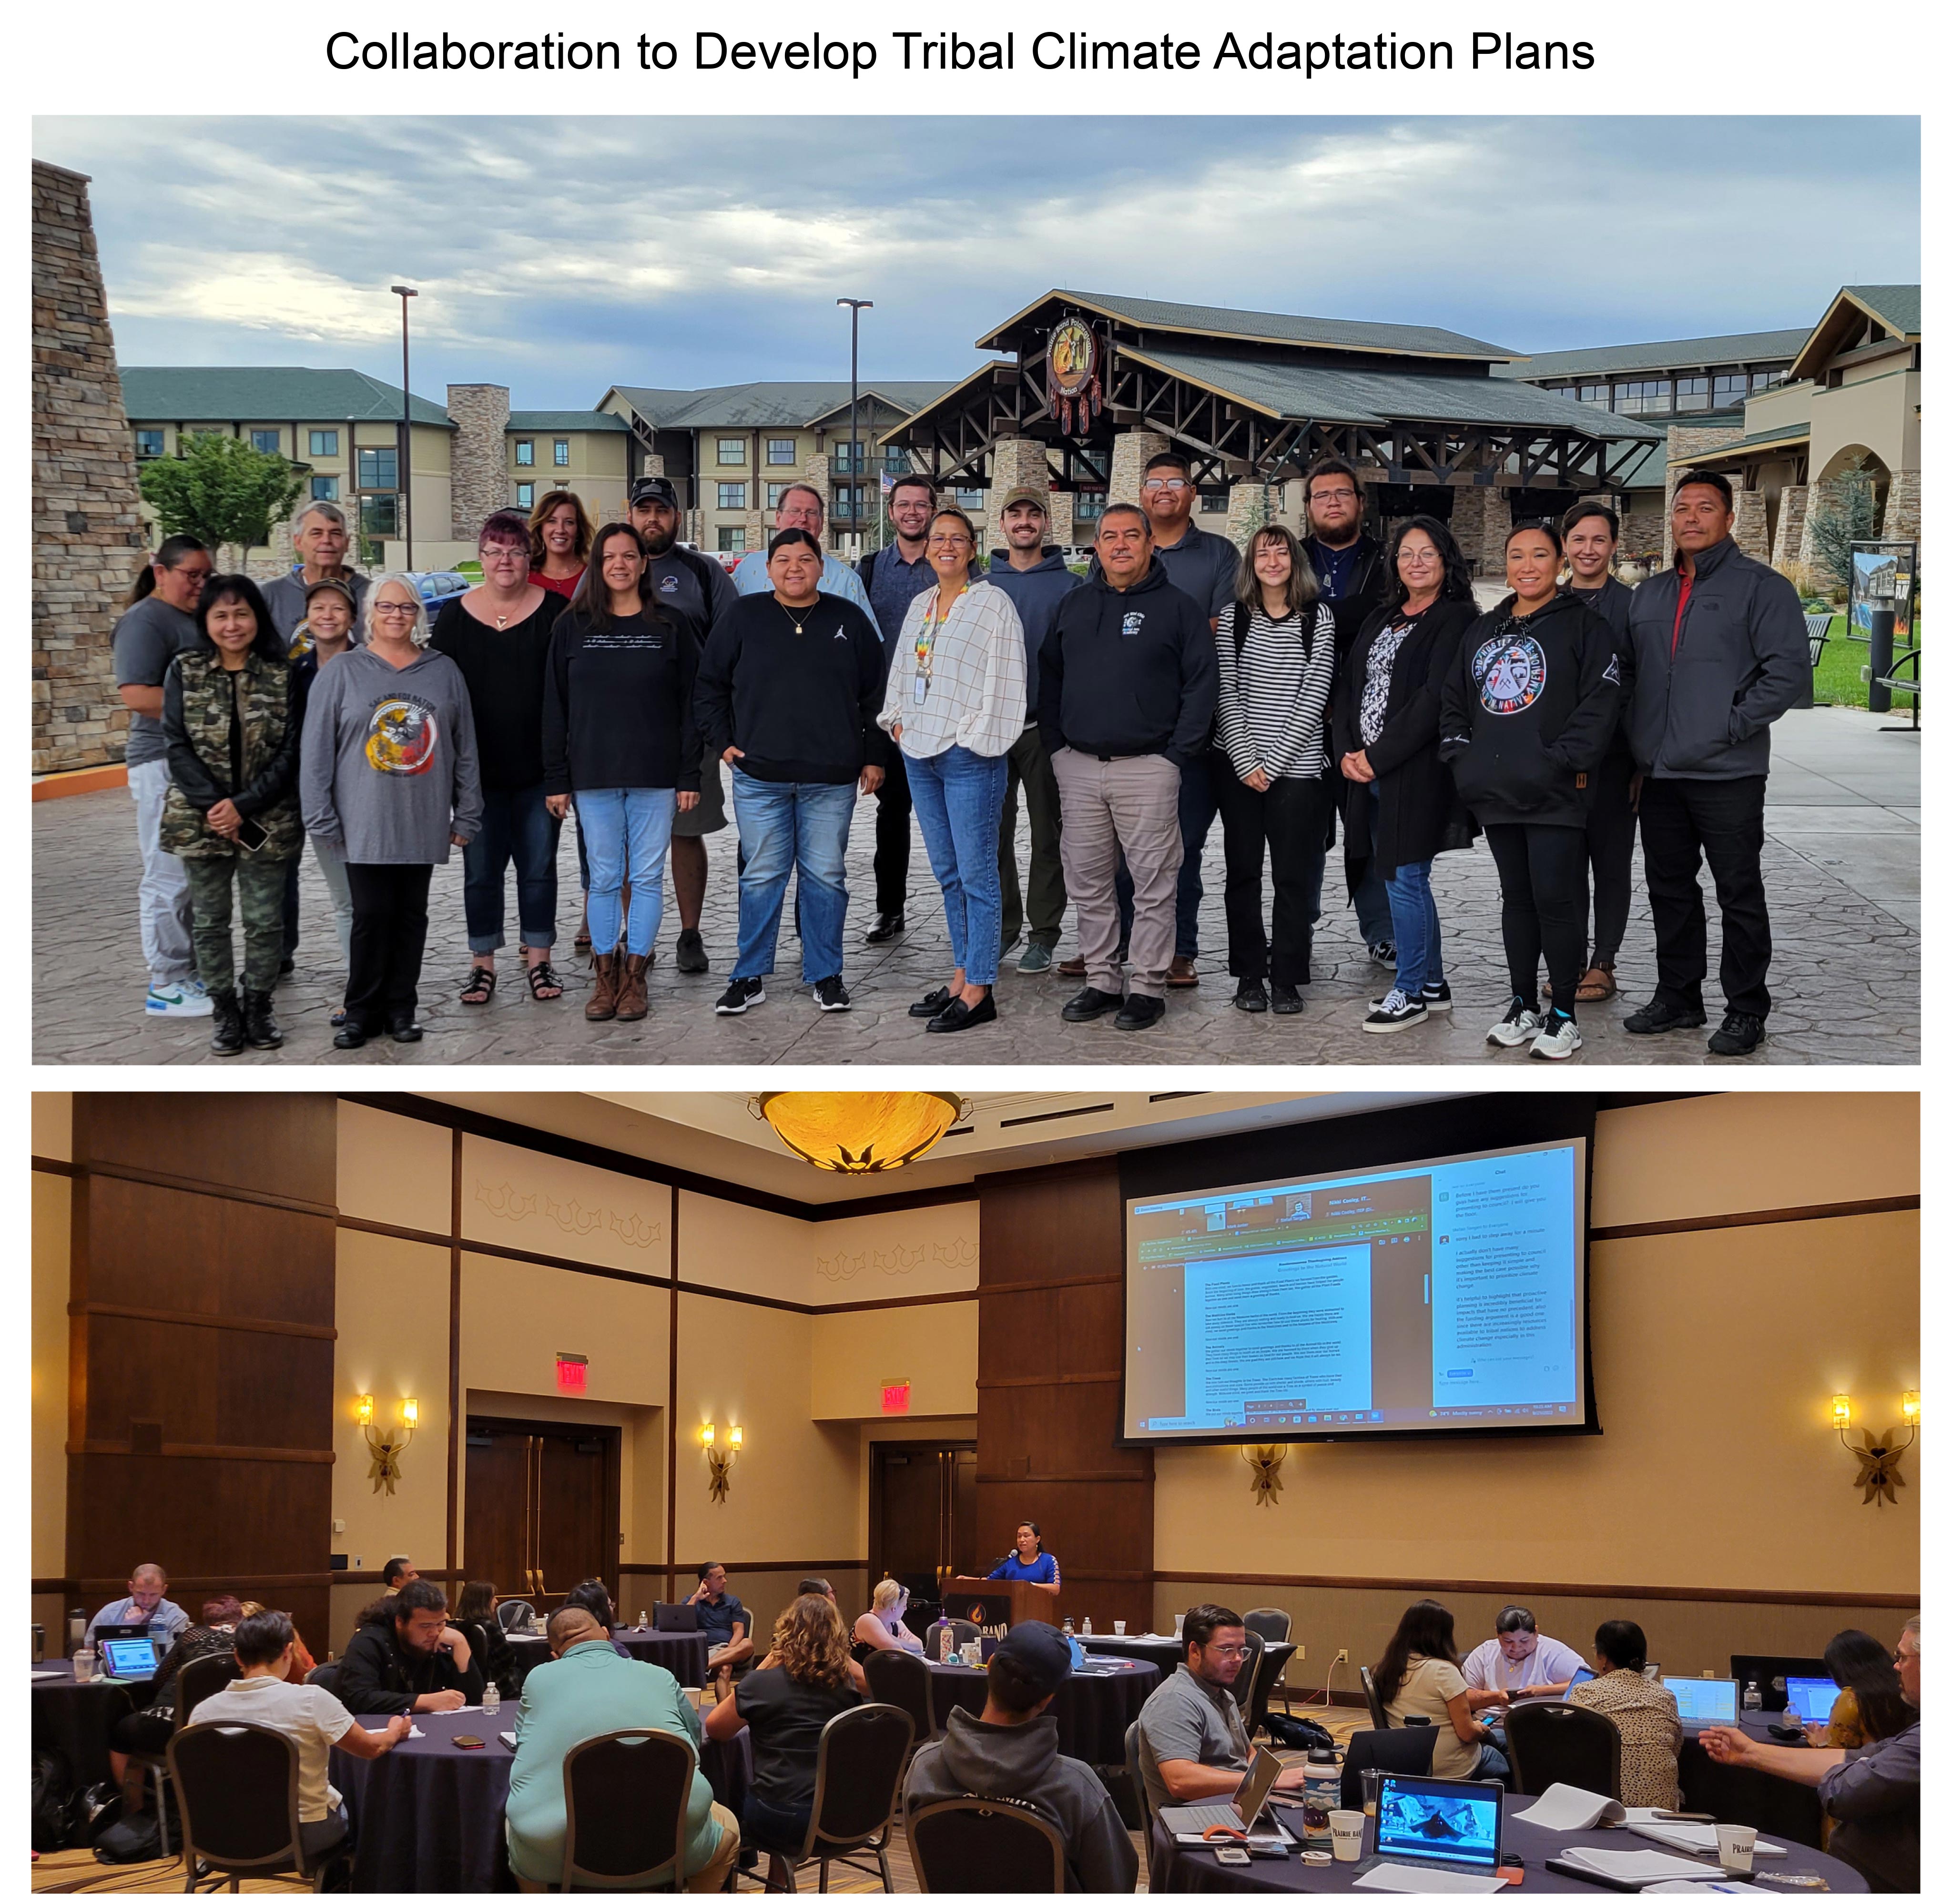 Collaboration to Develop Tribal Climate Adaptation Plans